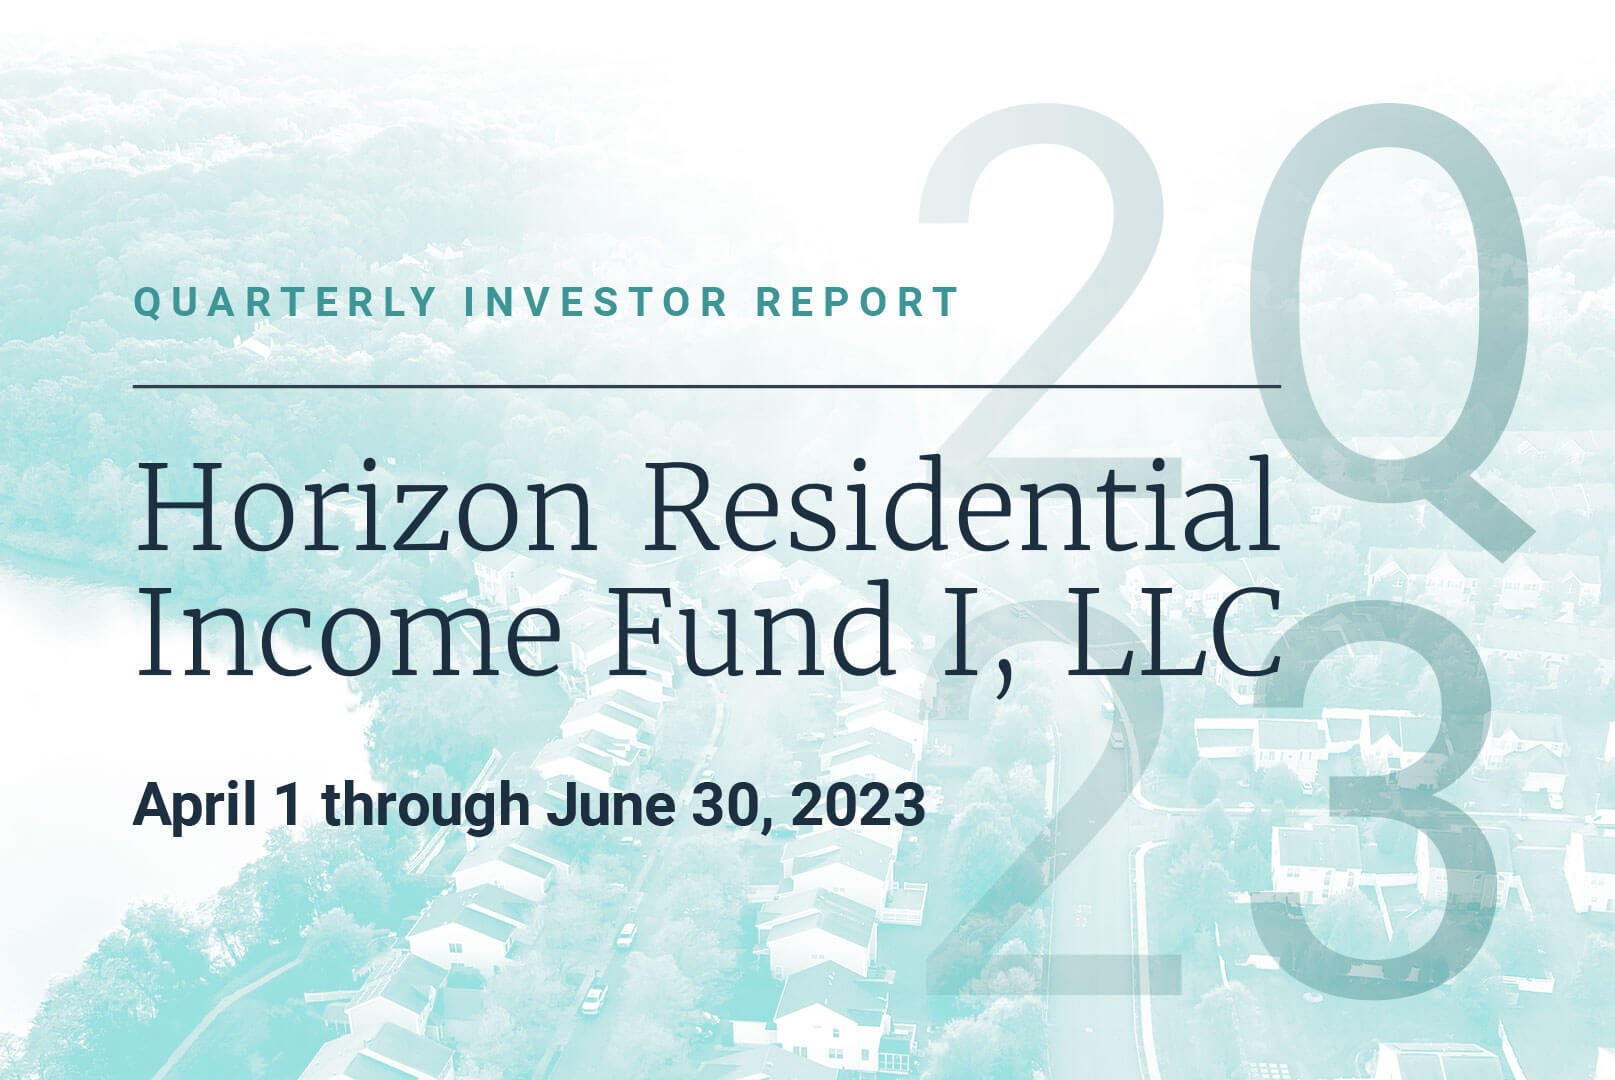 2Q23 Investor Report for the Horizon Residential Income Fund I, LLC.